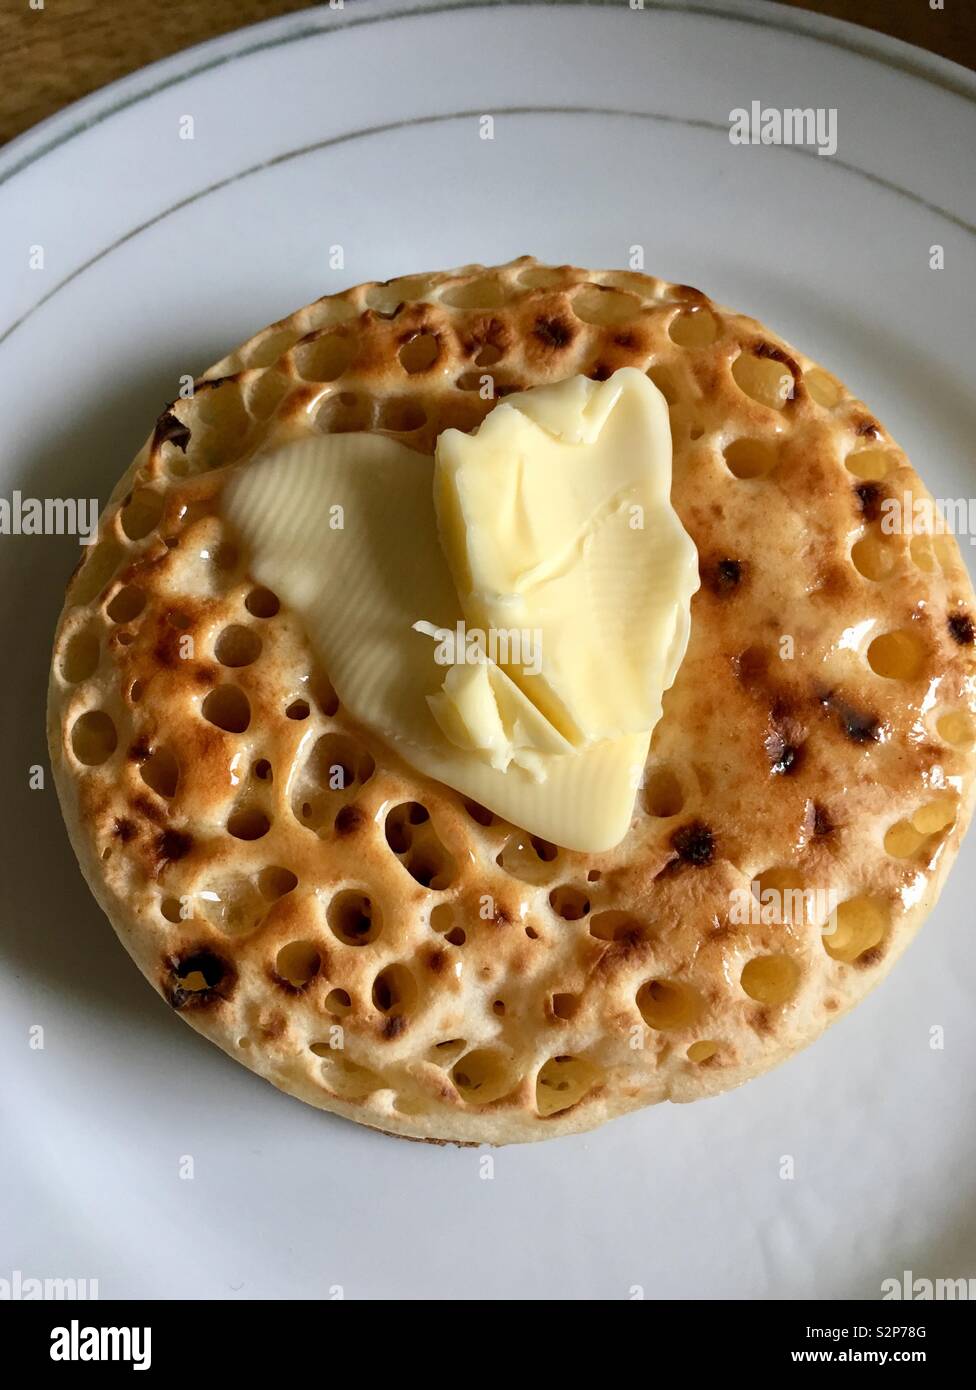 Butter on top of a crumpet Stock Photo